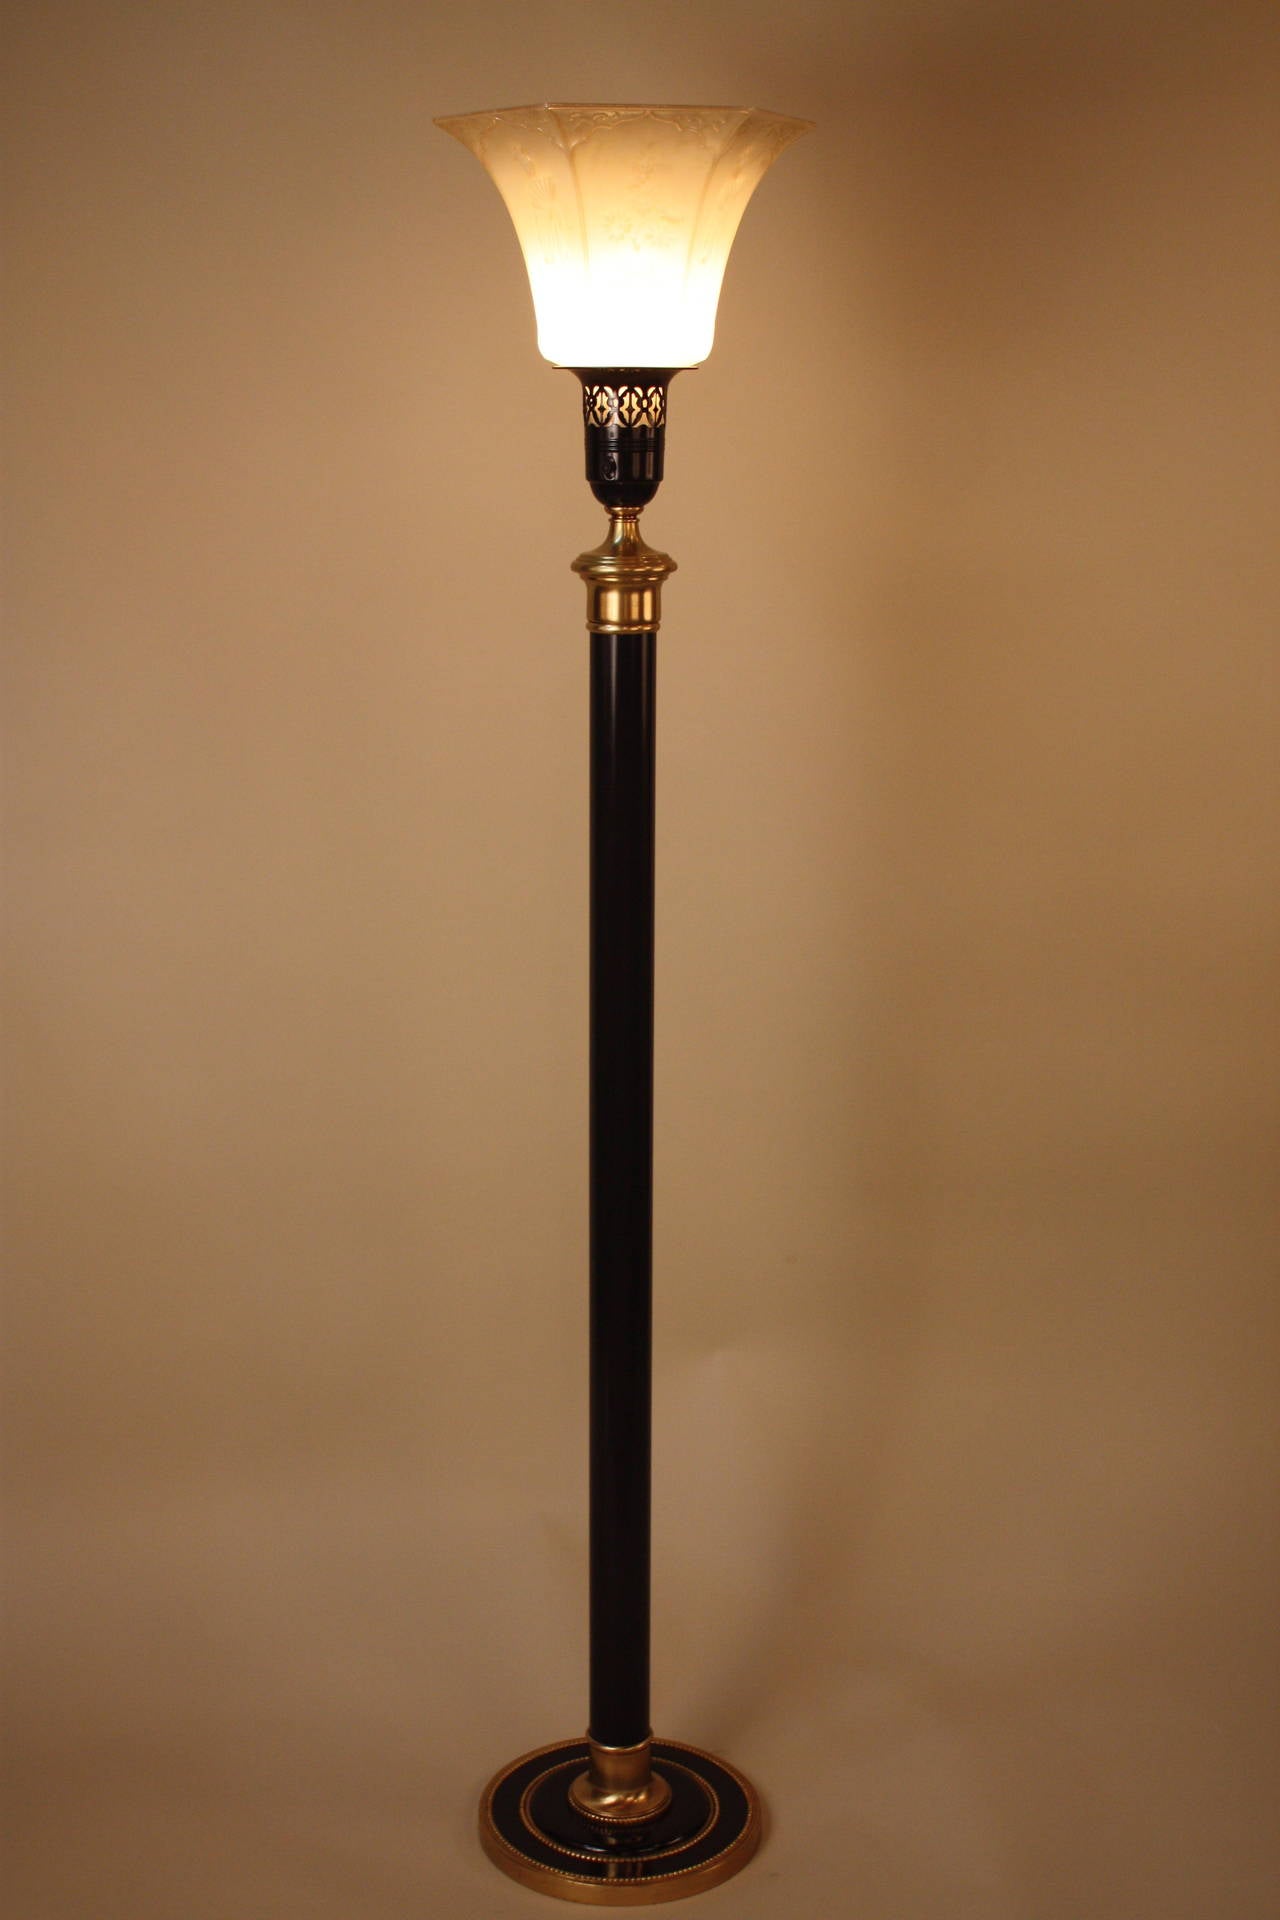 Elegant American 1950s torchieres in black lacquer brass with influence of orientalism on glass shade.